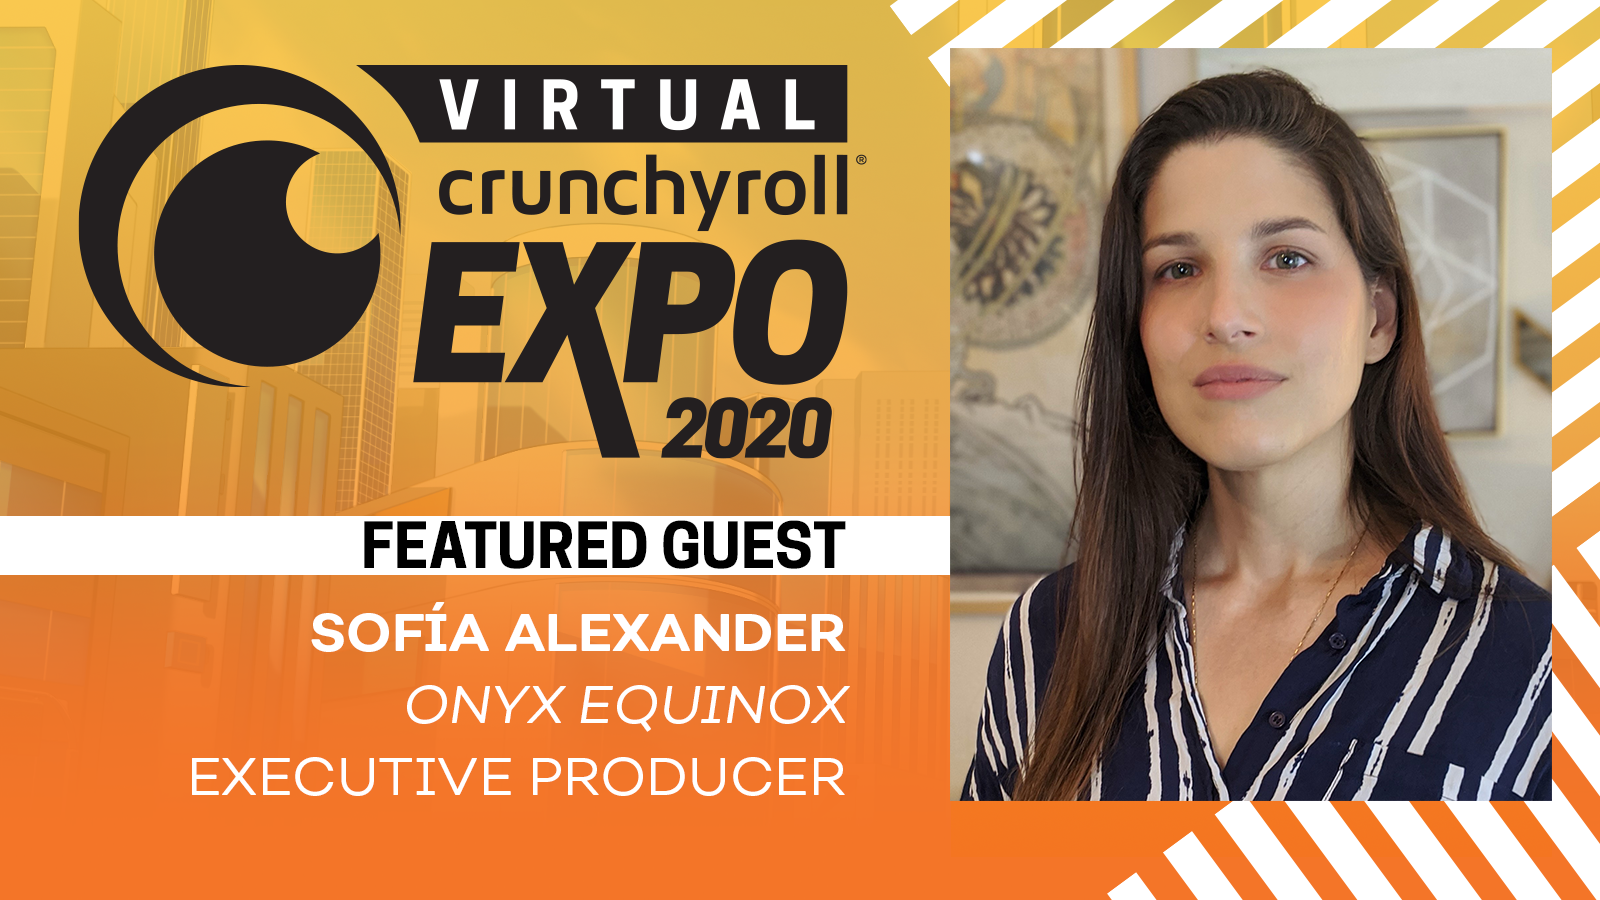 Crunchyroll Expo Guests